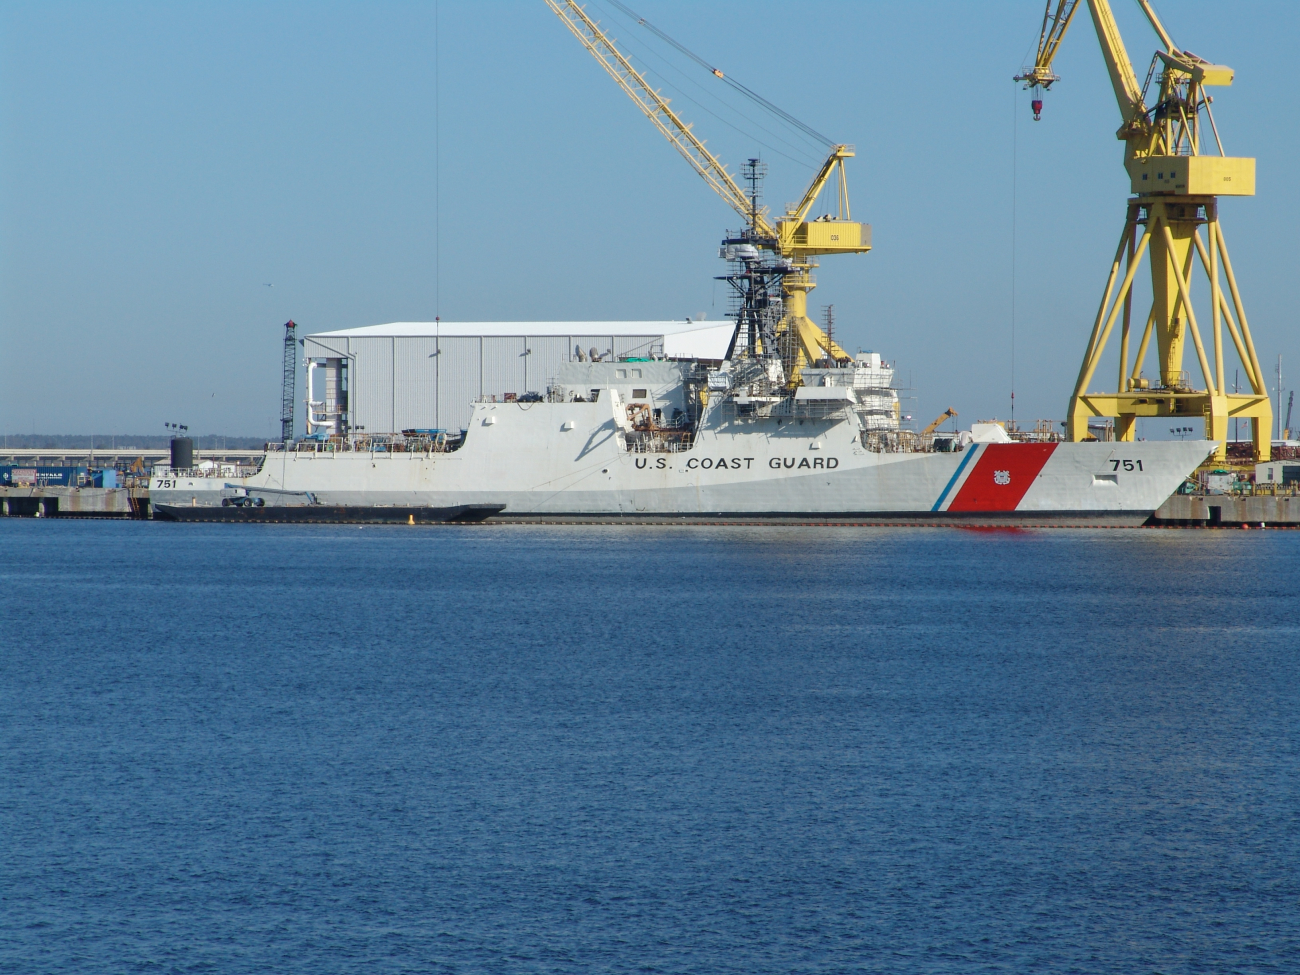 Coast Guard Cutter WAESCHE in a nearly finished state at the Northrop GrummanShipyard in Pascagoula, Mississippi